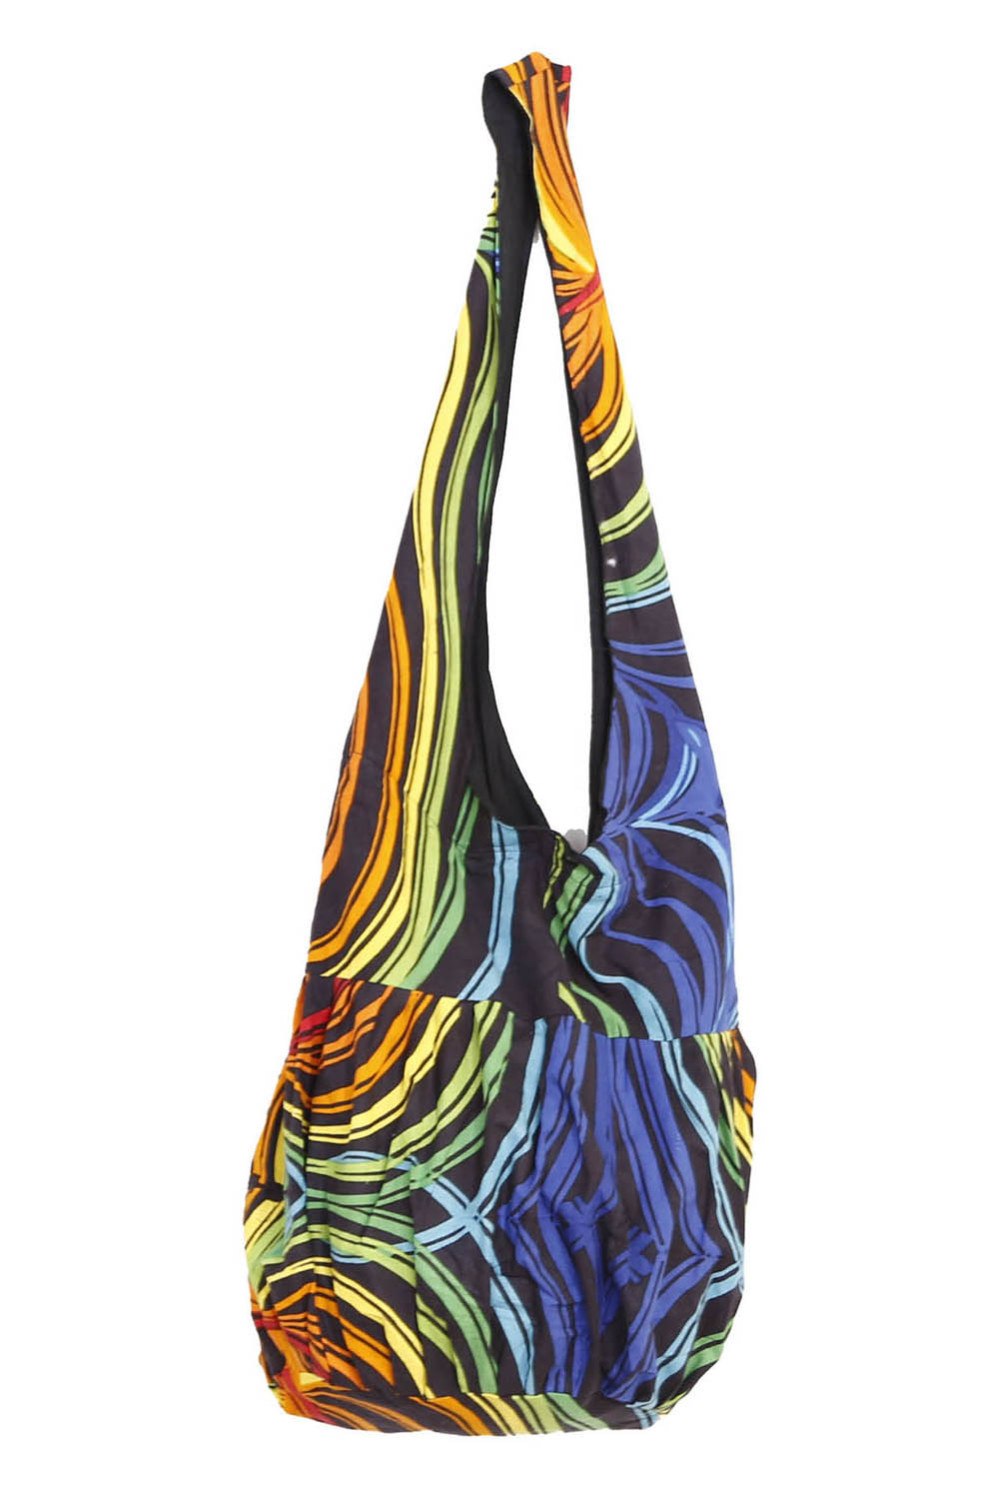 Rainbow Ripple Zip Top Hobo Shoulder Bag **RESERVE NOW FOR AUGUST DELIVERY**  